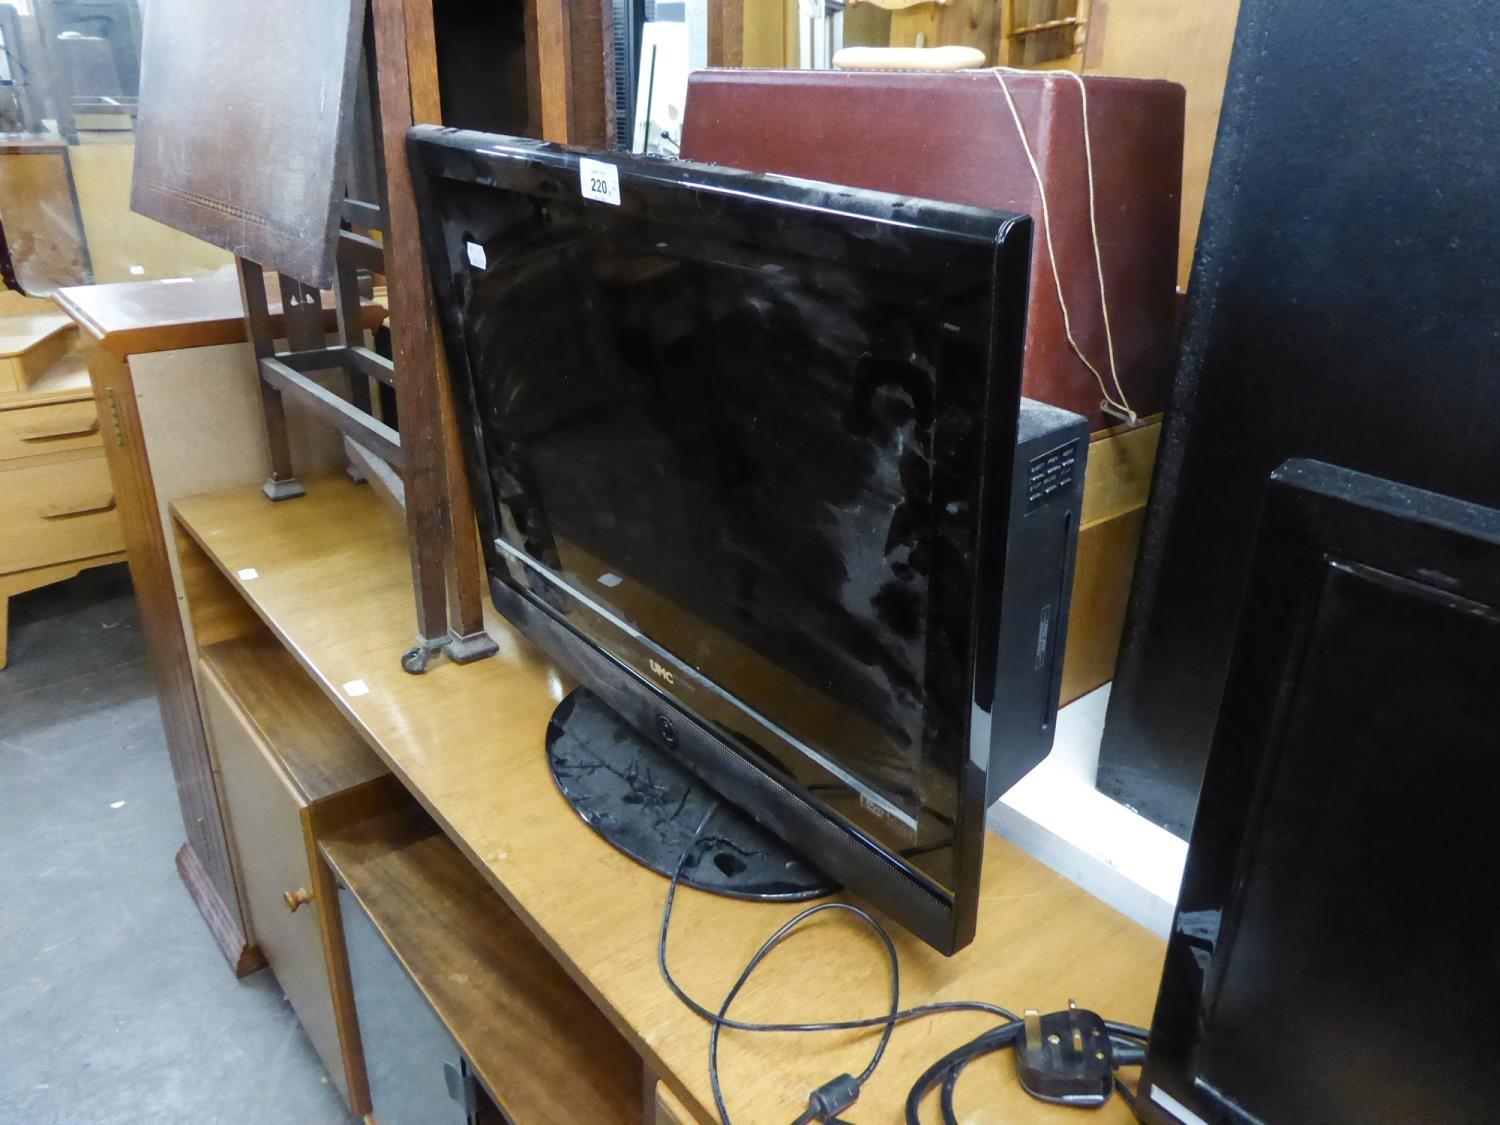 UMC FLAT SCREEN TELEVISION AND DVD PLAYER COMBINED, 22?